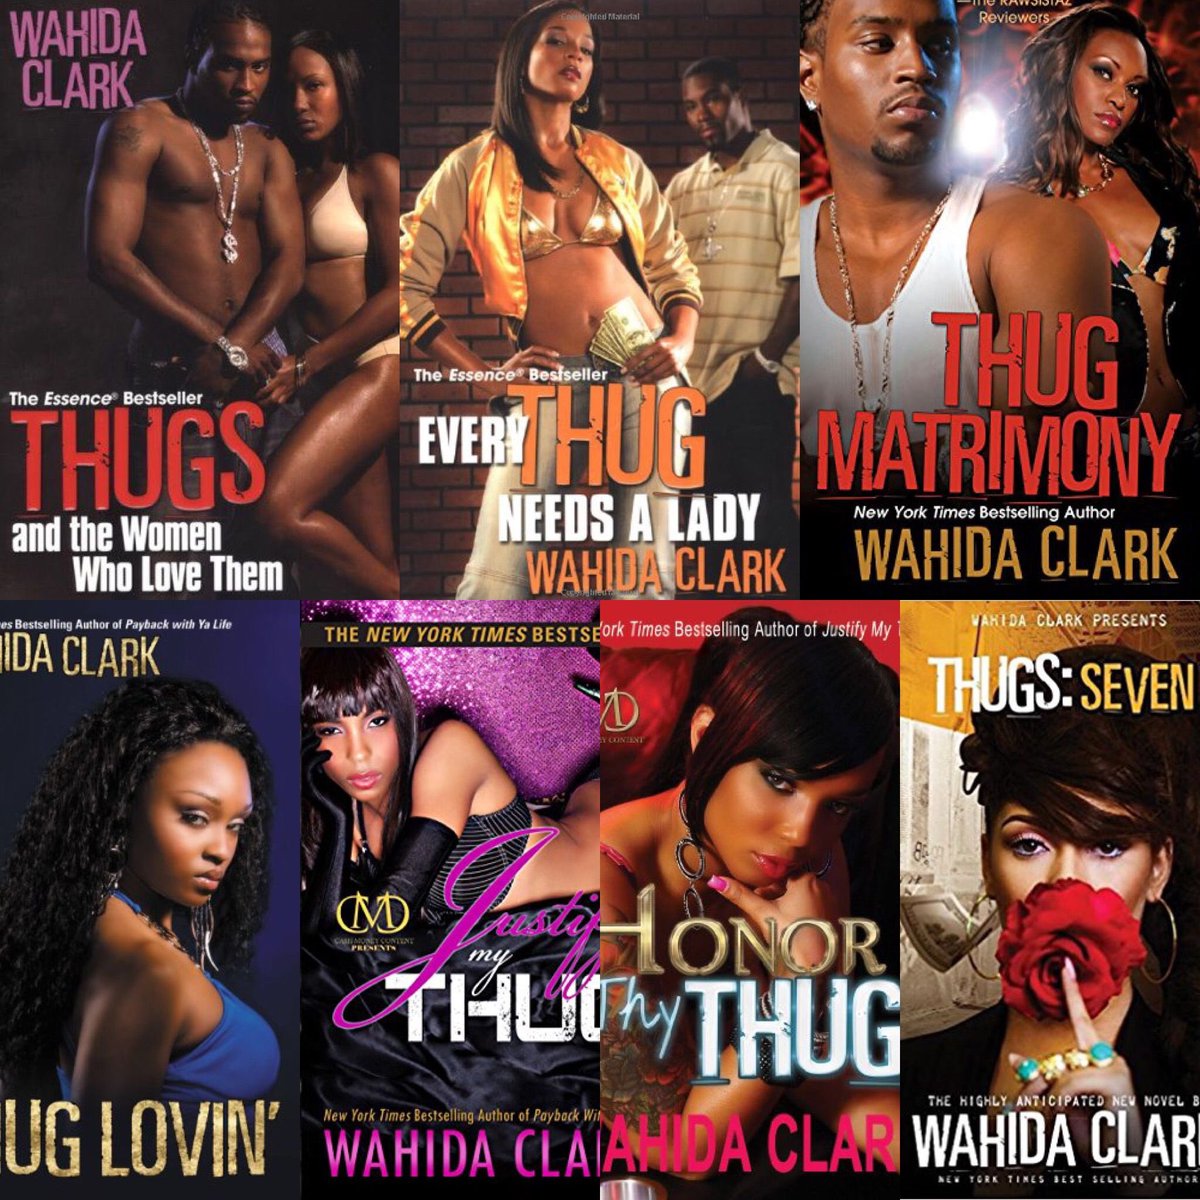 I went through this phase of reading good books about thugs and love Lool when I was 19/20 but Wahida Clark had a good series of them and she had me hooked so boy...